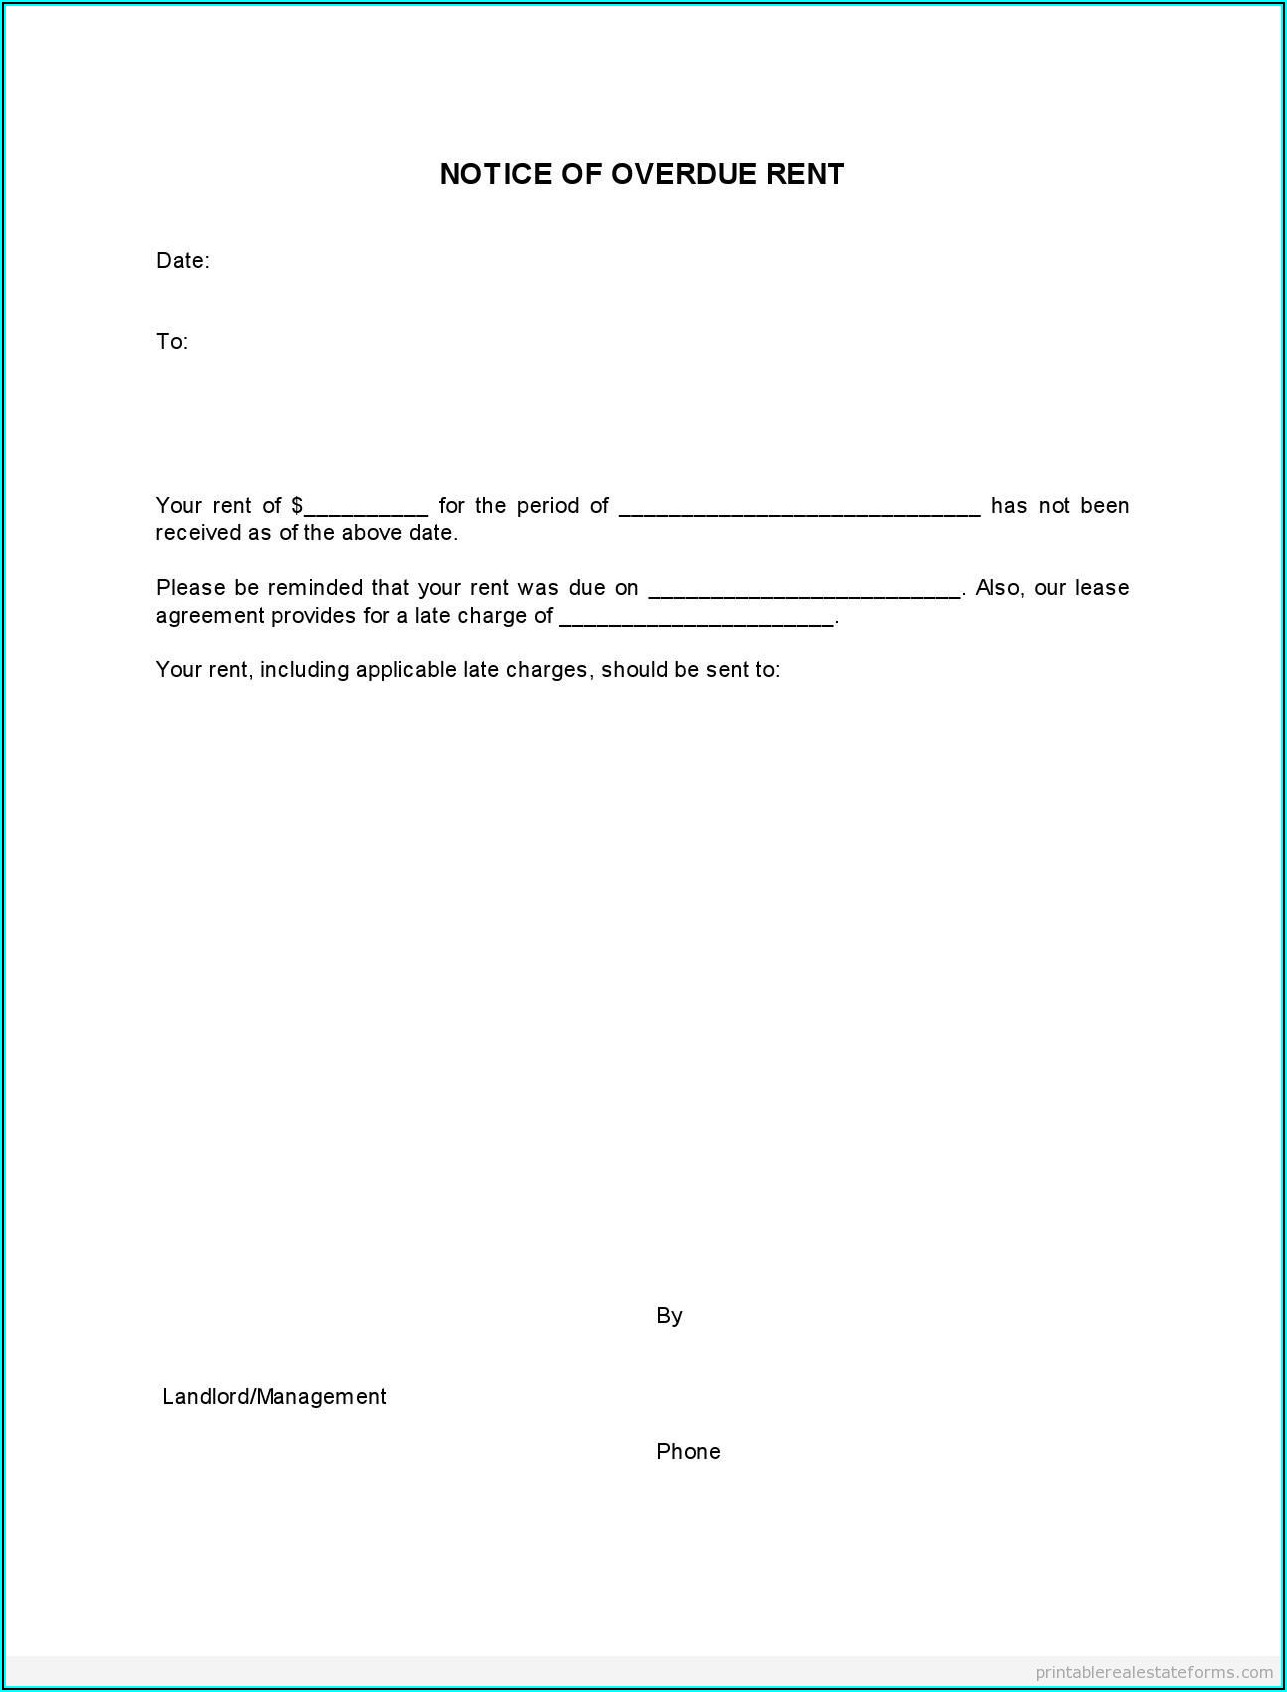 Free Printable Late Rent Notice Form